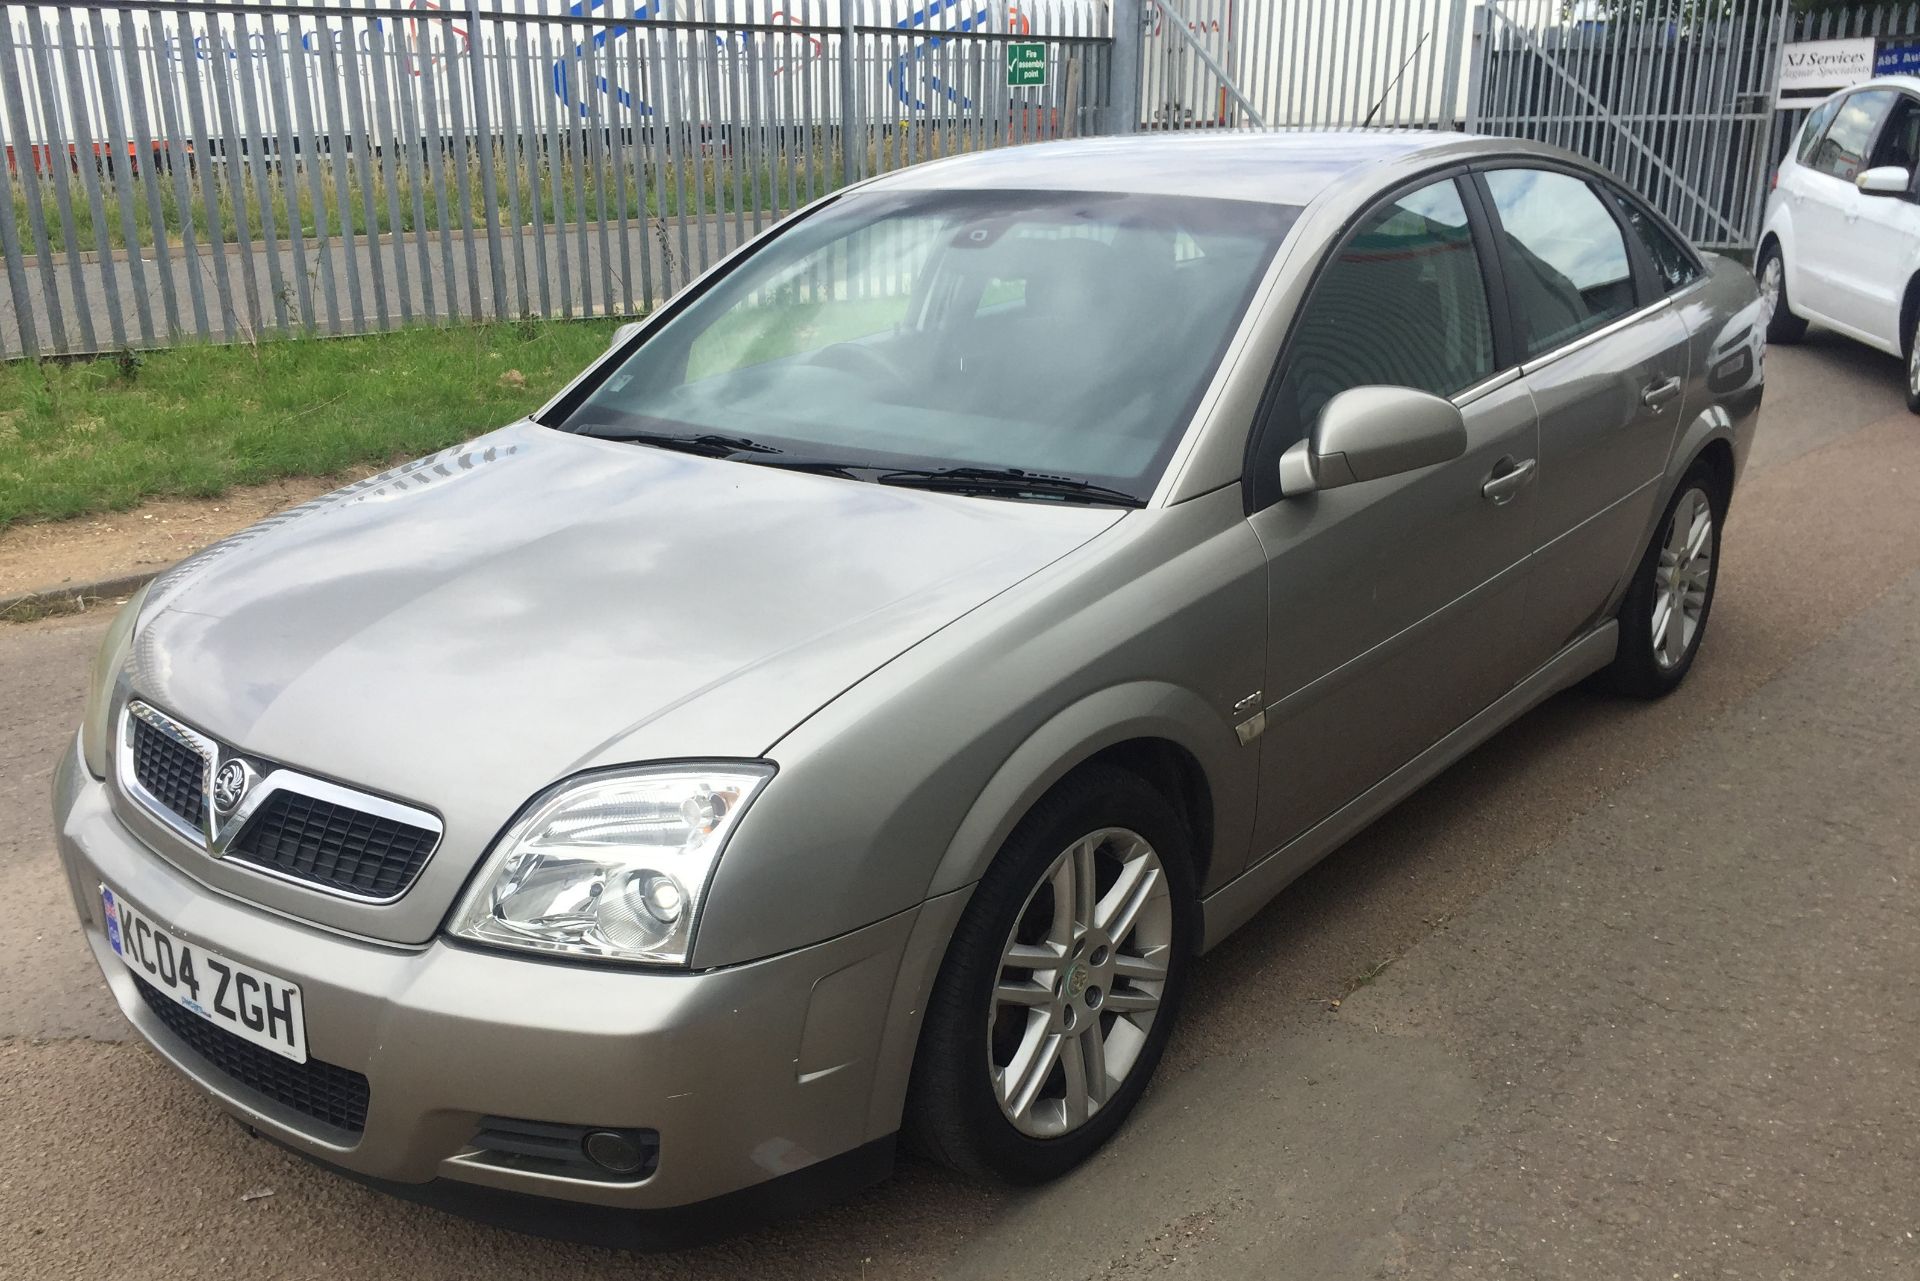 2004 Vauxhall Vectra 2.2 Sri Automatic 4 Dr Saloon - CL505 - NO VAT ON THE HAMMER - Location: - Image 5 of 7